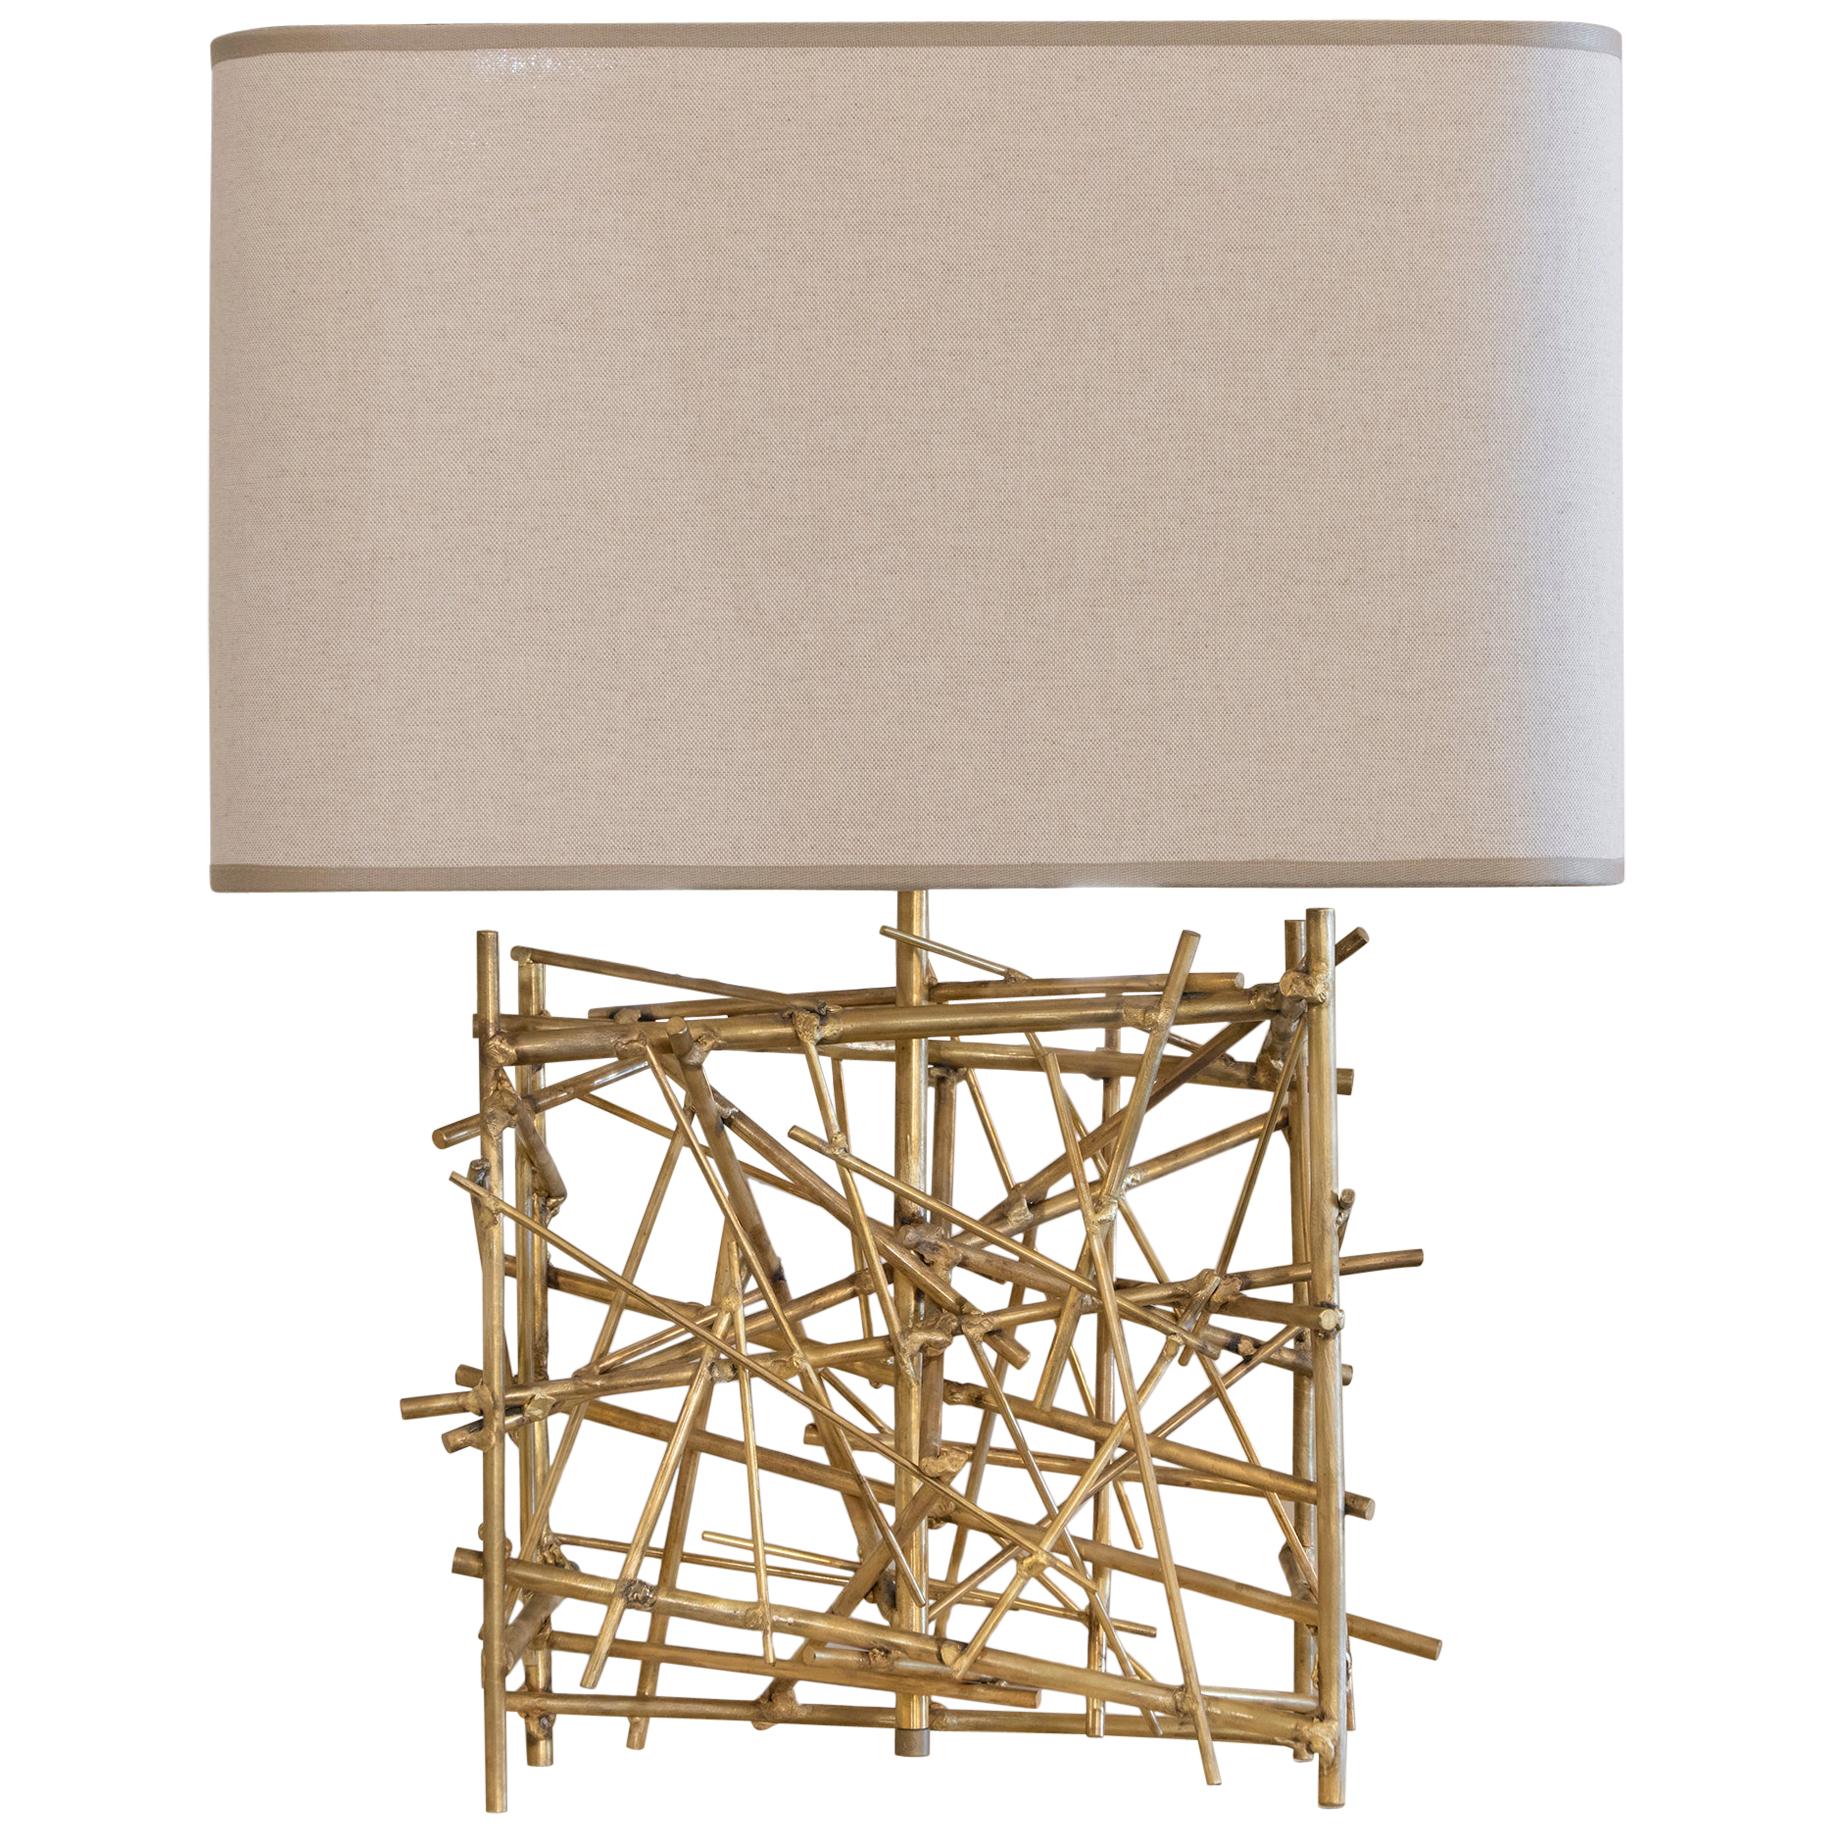 Flair Edition "Nest" Natural Brass Table Lamp, Italy, 2019